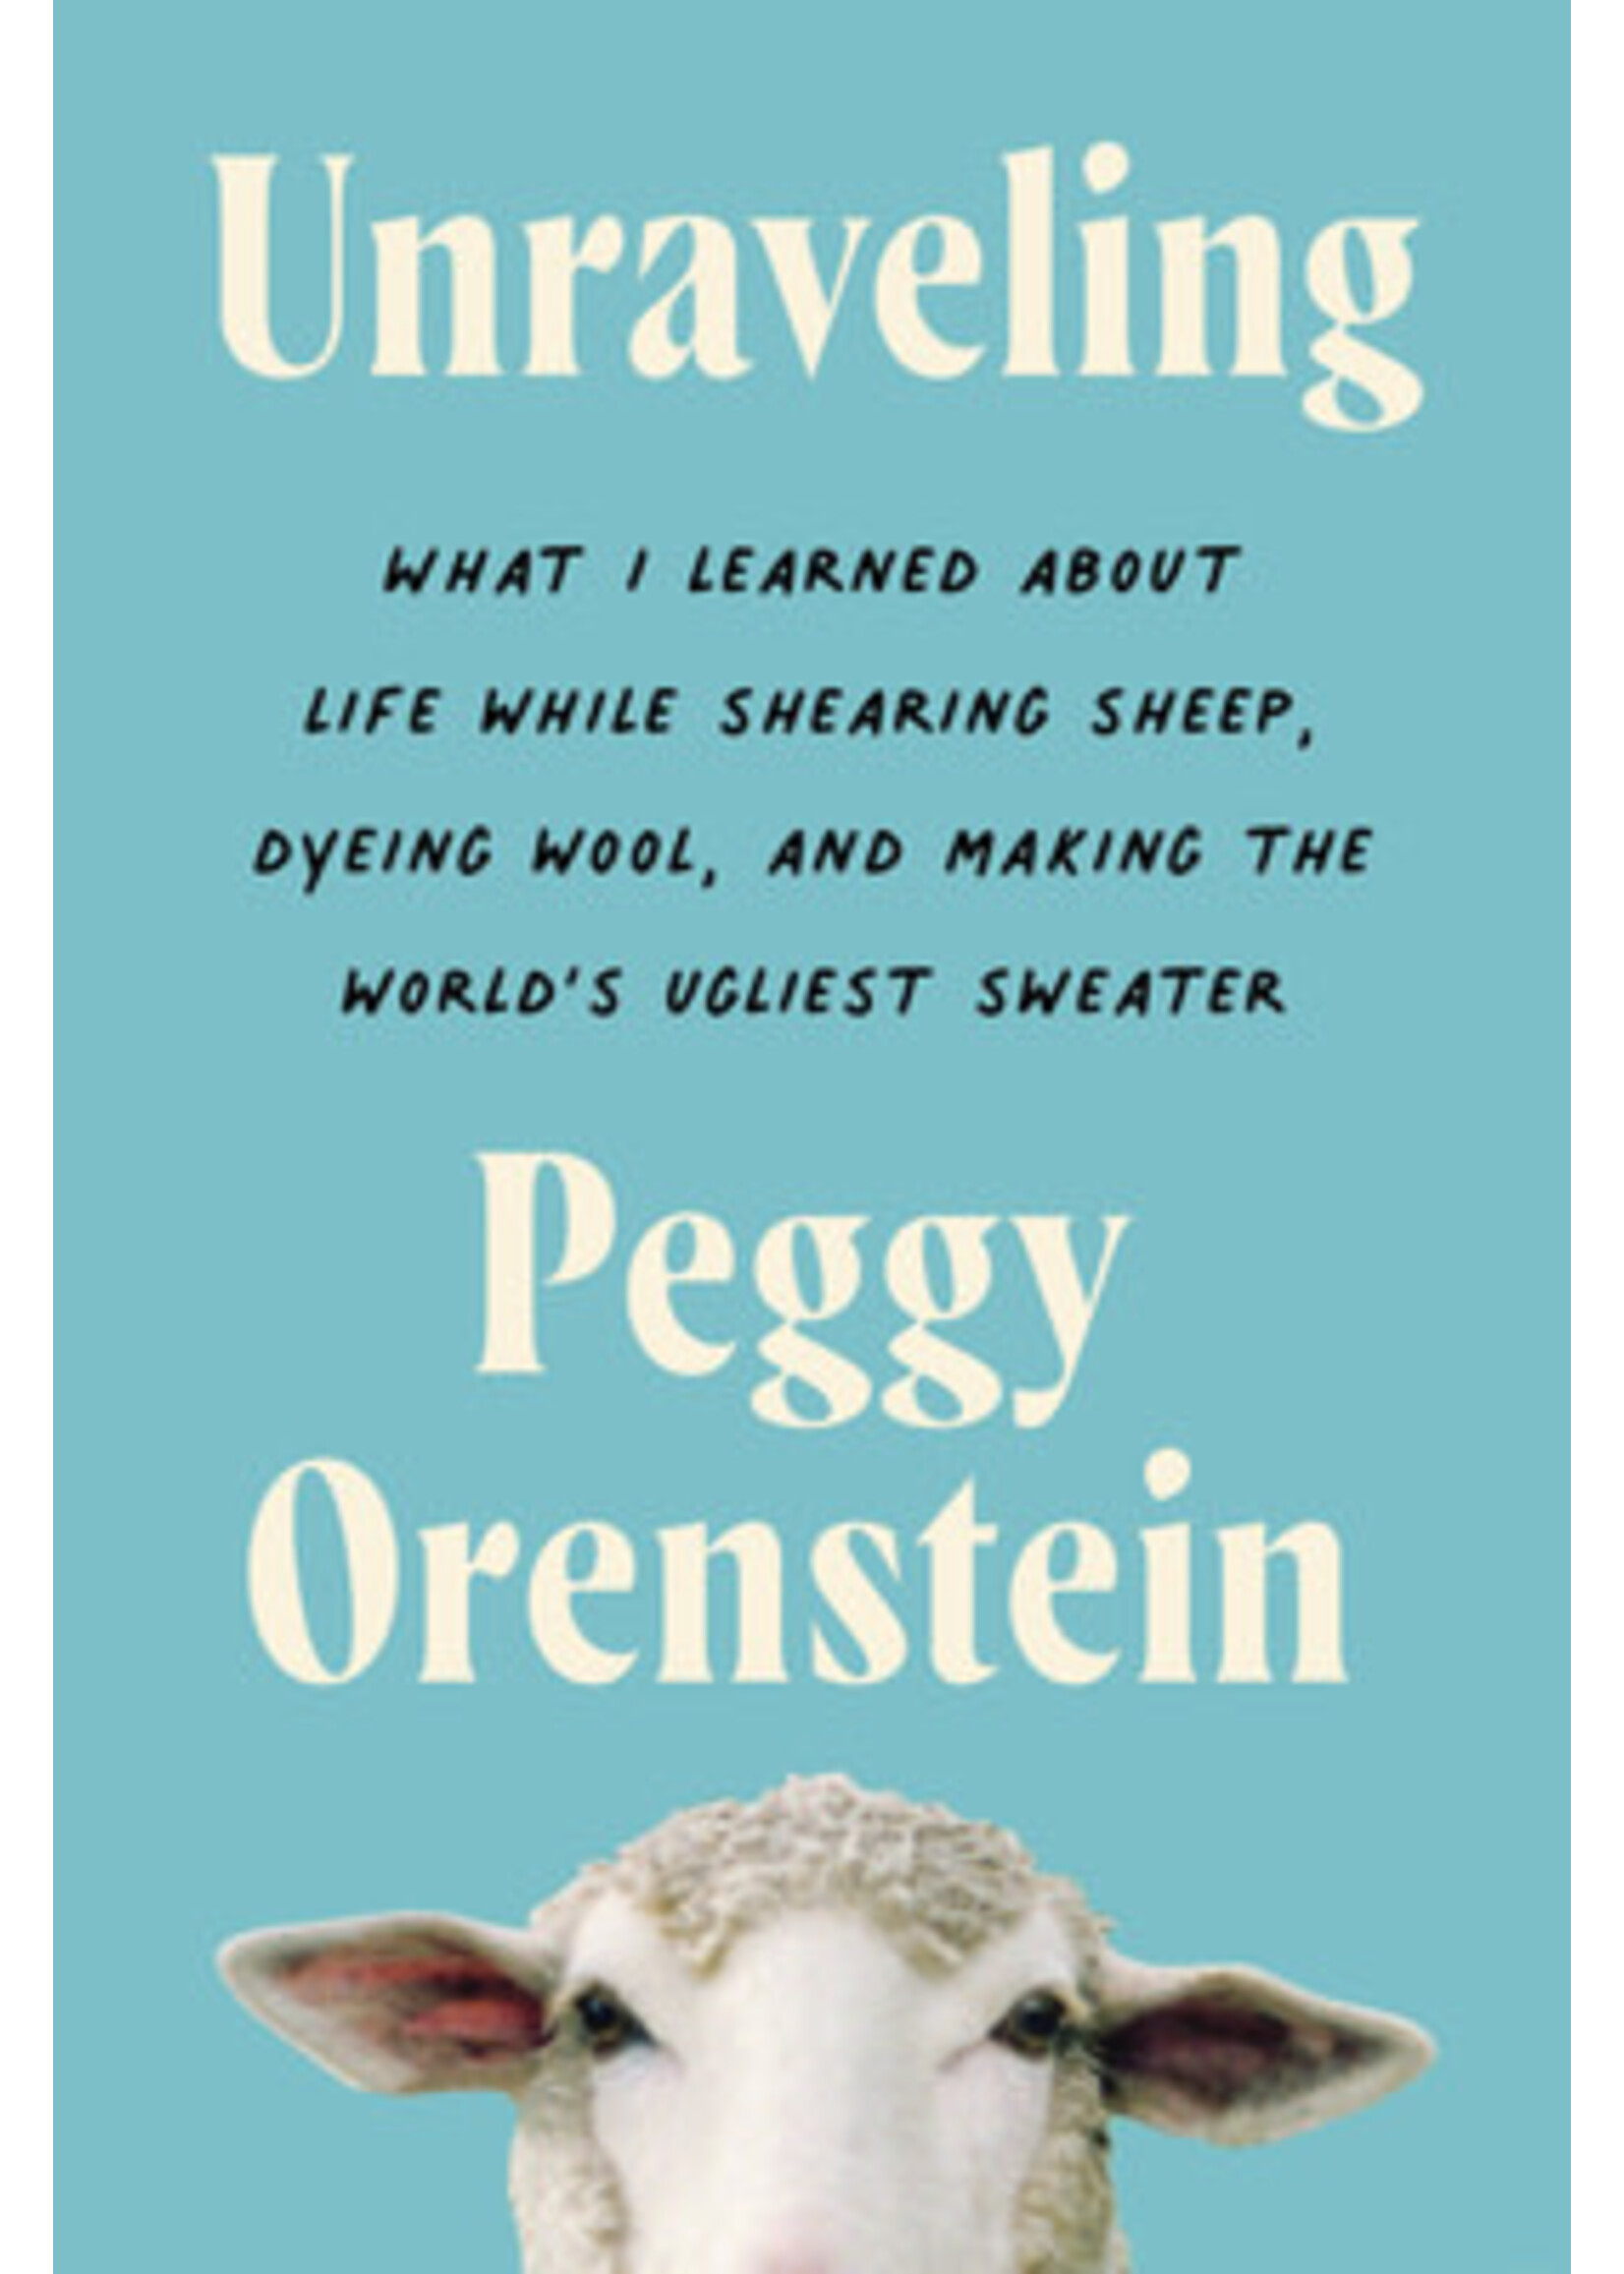 Unraveling: What I Learned About Life While Shearing Sheep, Dyeing Wool, and Making the World's Ugliest Sweater by Peggy Orenstein